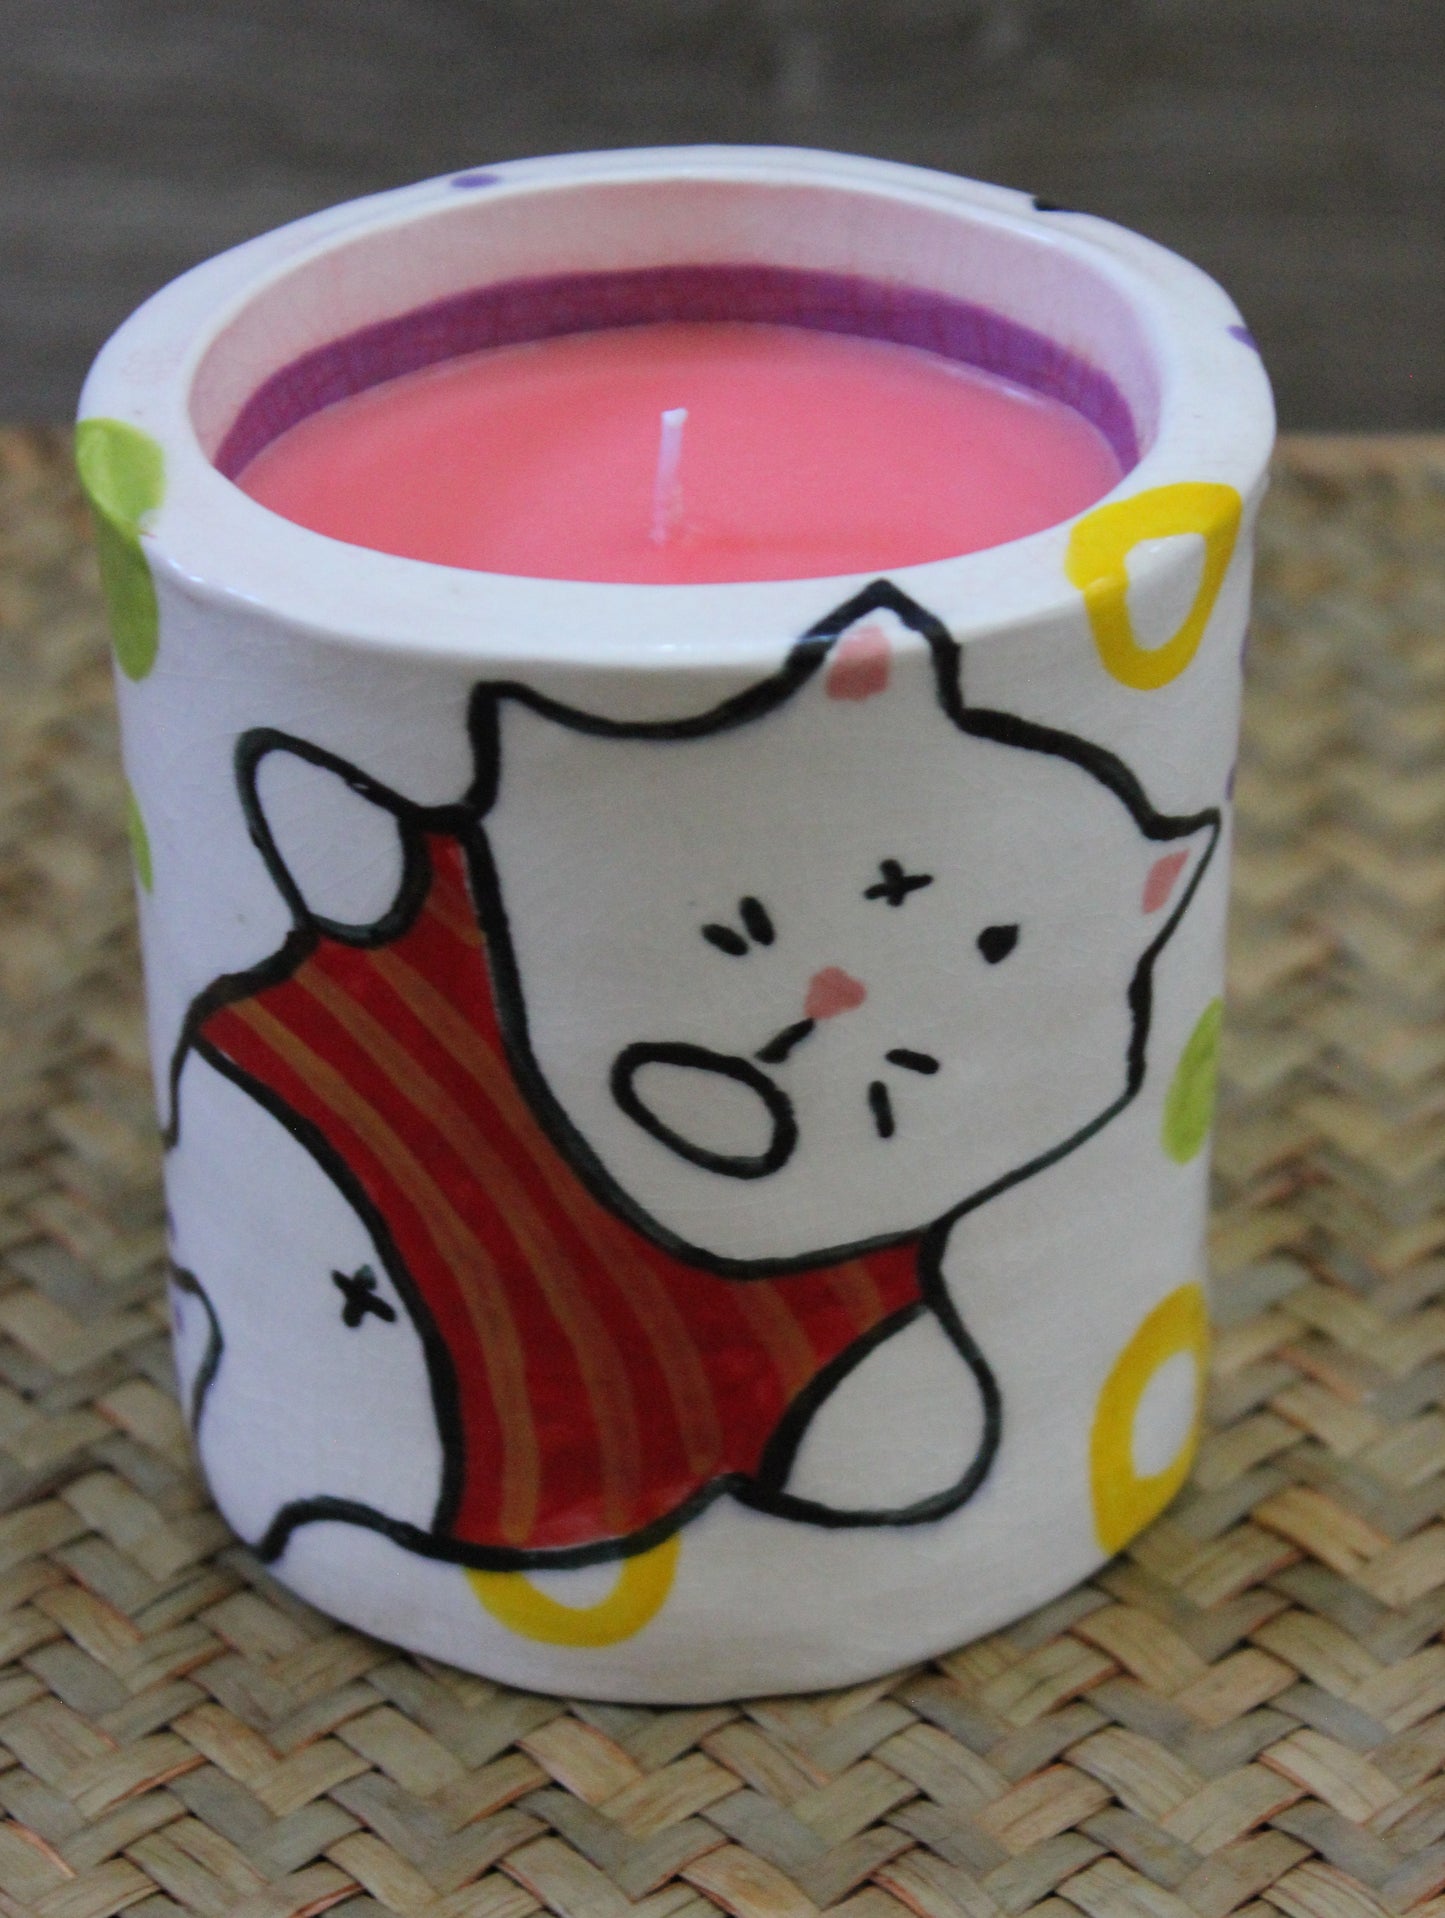 Artistic Cat Candle Tabletop Vessel with Hand Crafted Cherry Scented Candle